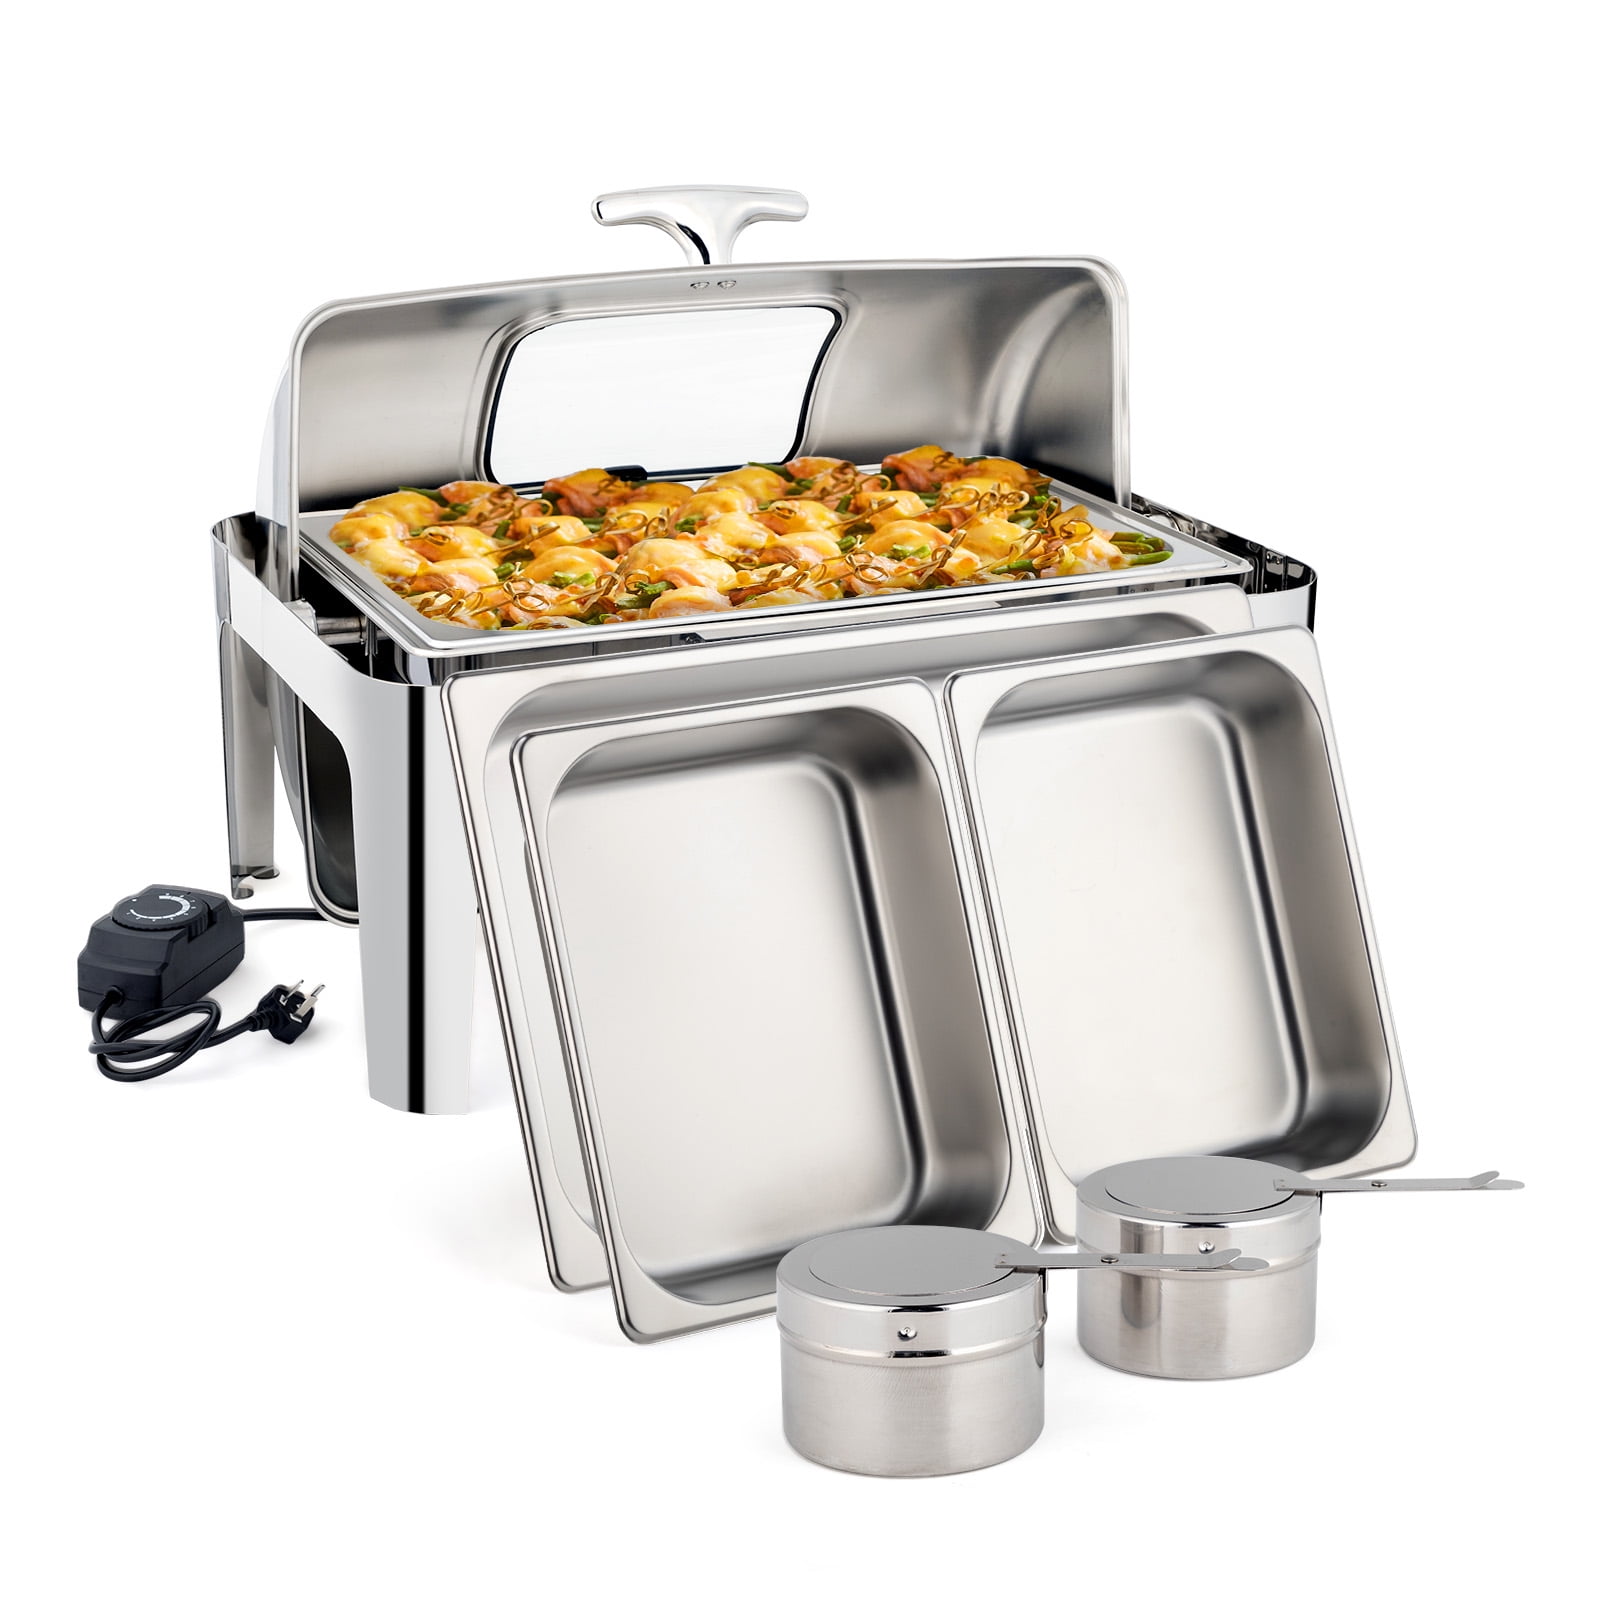 Ktaxon 4 Pan Commercial Food Warmer, Professional Stainless Steel Buffet  21.1 Quart Capacity for Catering and Restaurants 